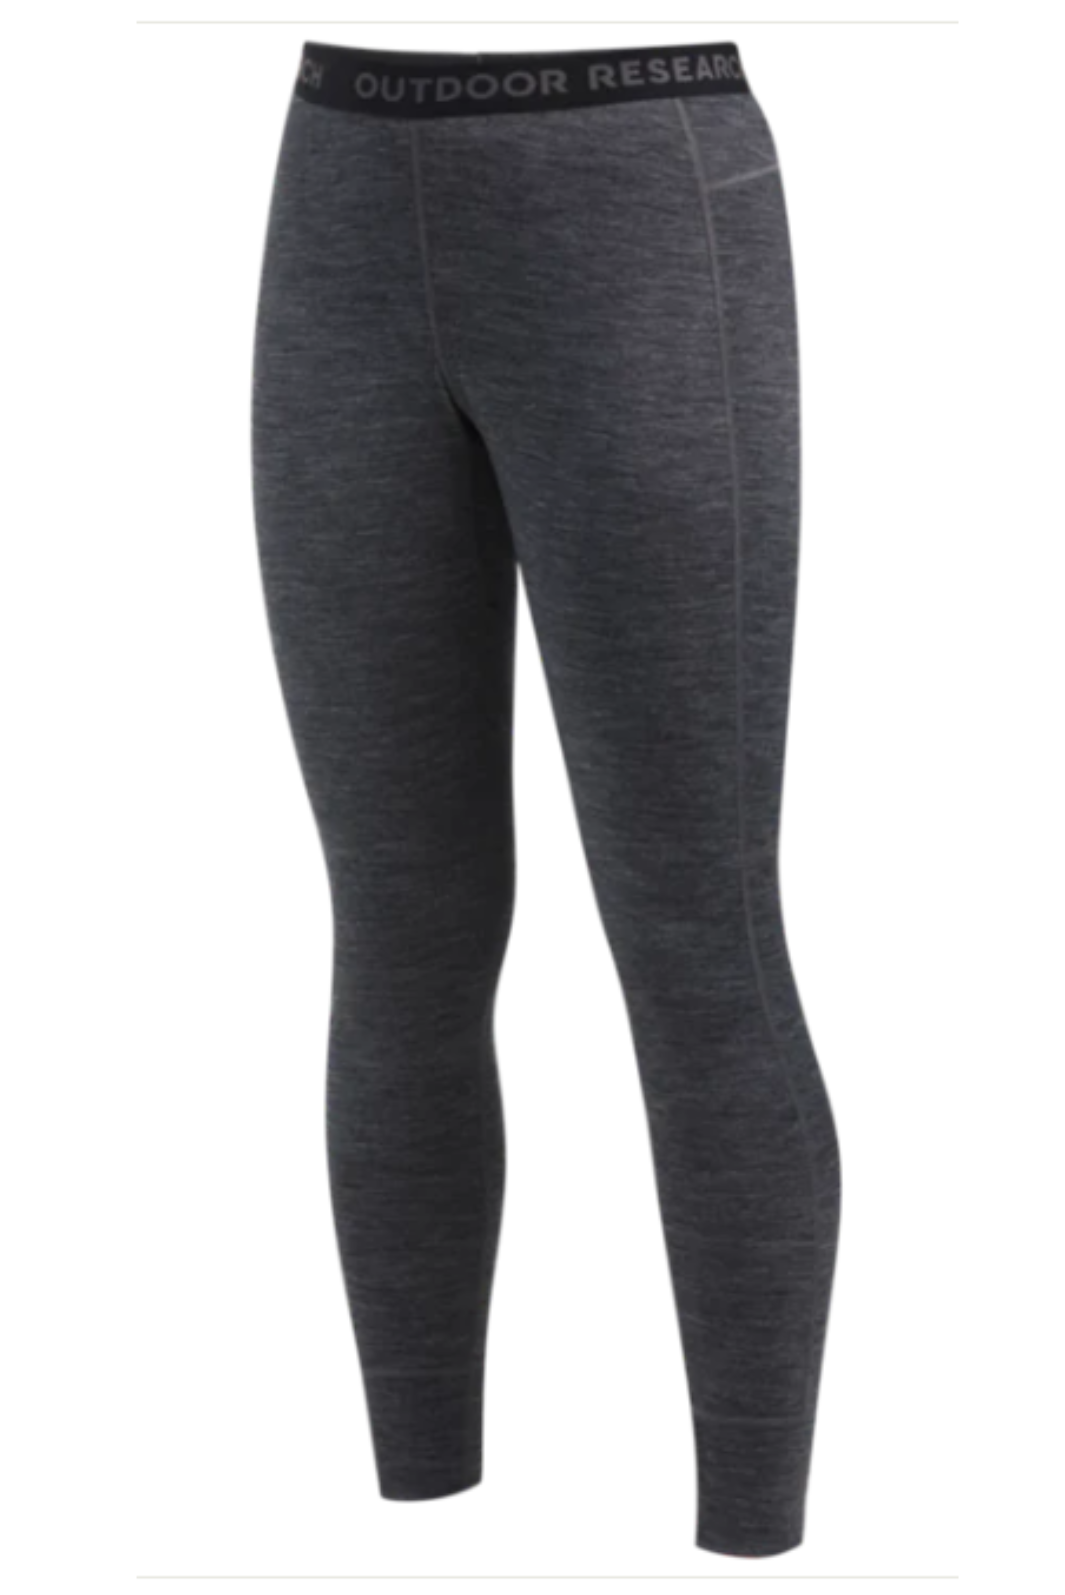 Outdoor Research Plus Size Alpine Onset Merino 150 Pant Base Layer